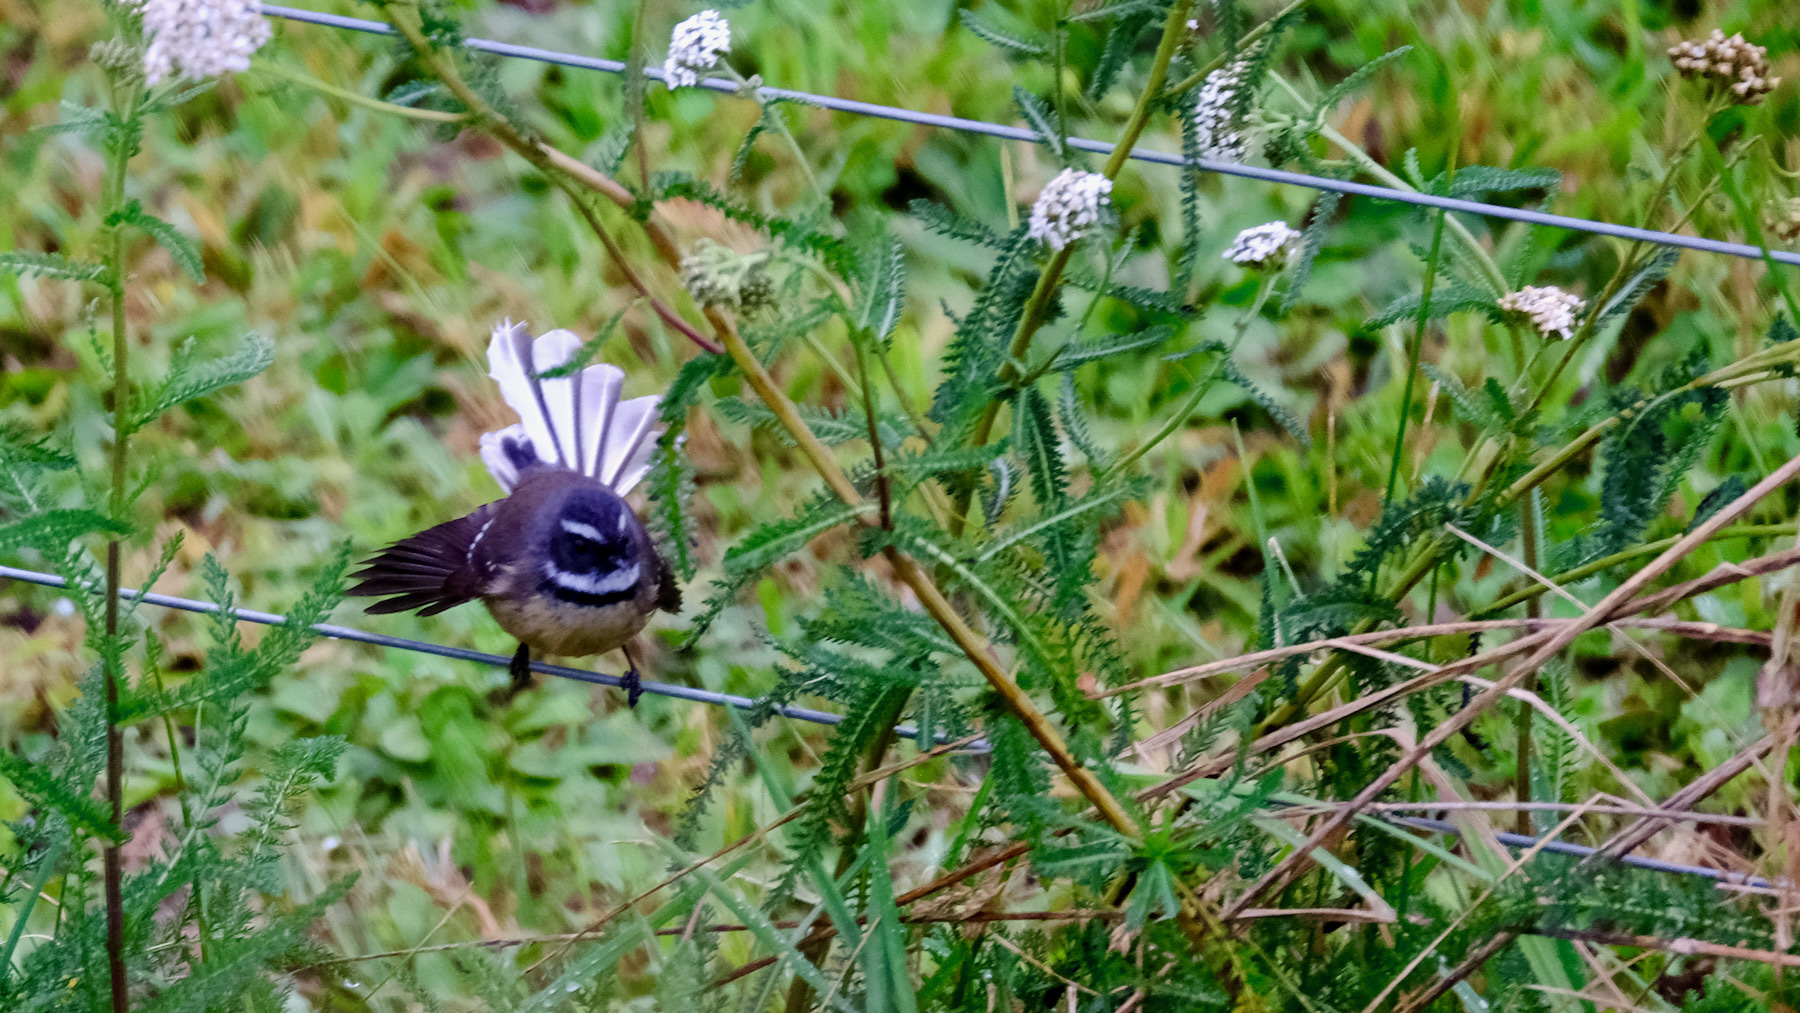 Small bird with fan-shaped tail, sitting on a fence wire. 